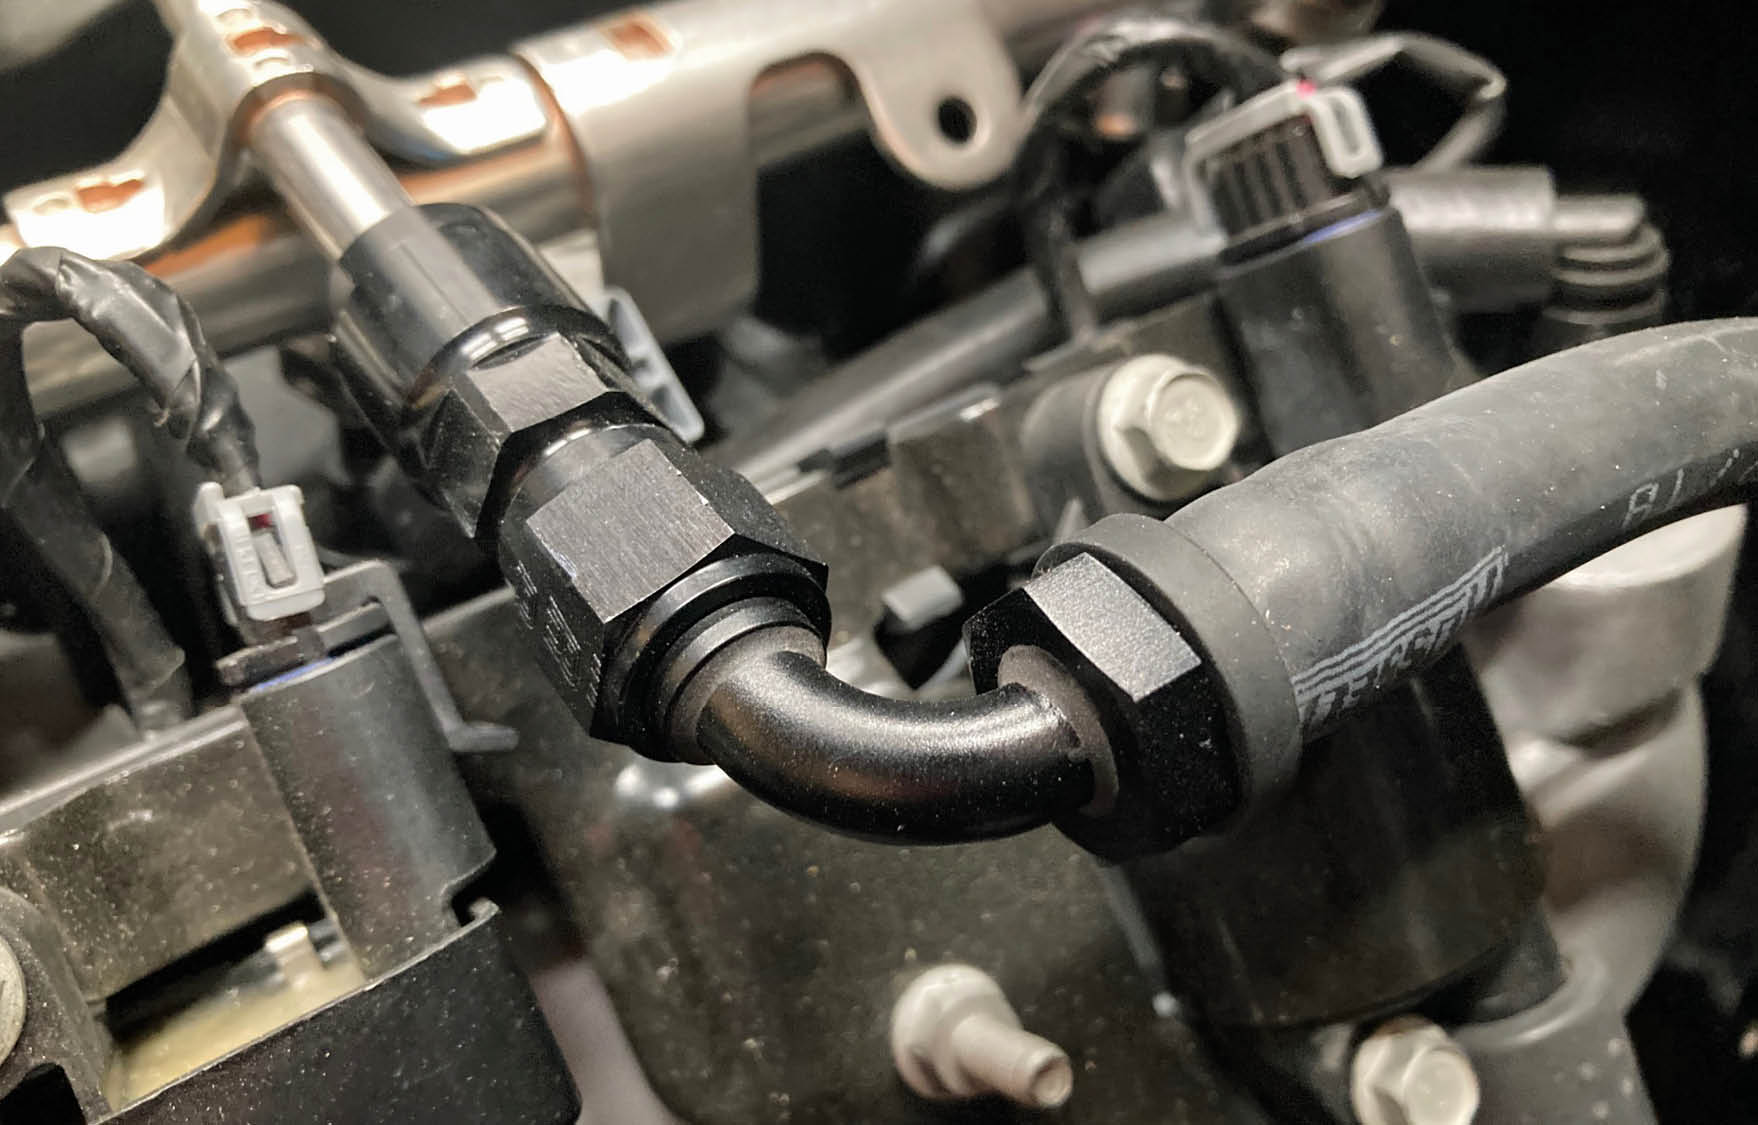 Here’s an example of an assembled AN-6 Twist-Lok assembly from our LS fuel system. The Twist-Lok line is a great alternative to other, more expensive AN systems out there, and the plain rubber hose blends in nicely in any engine compartment.